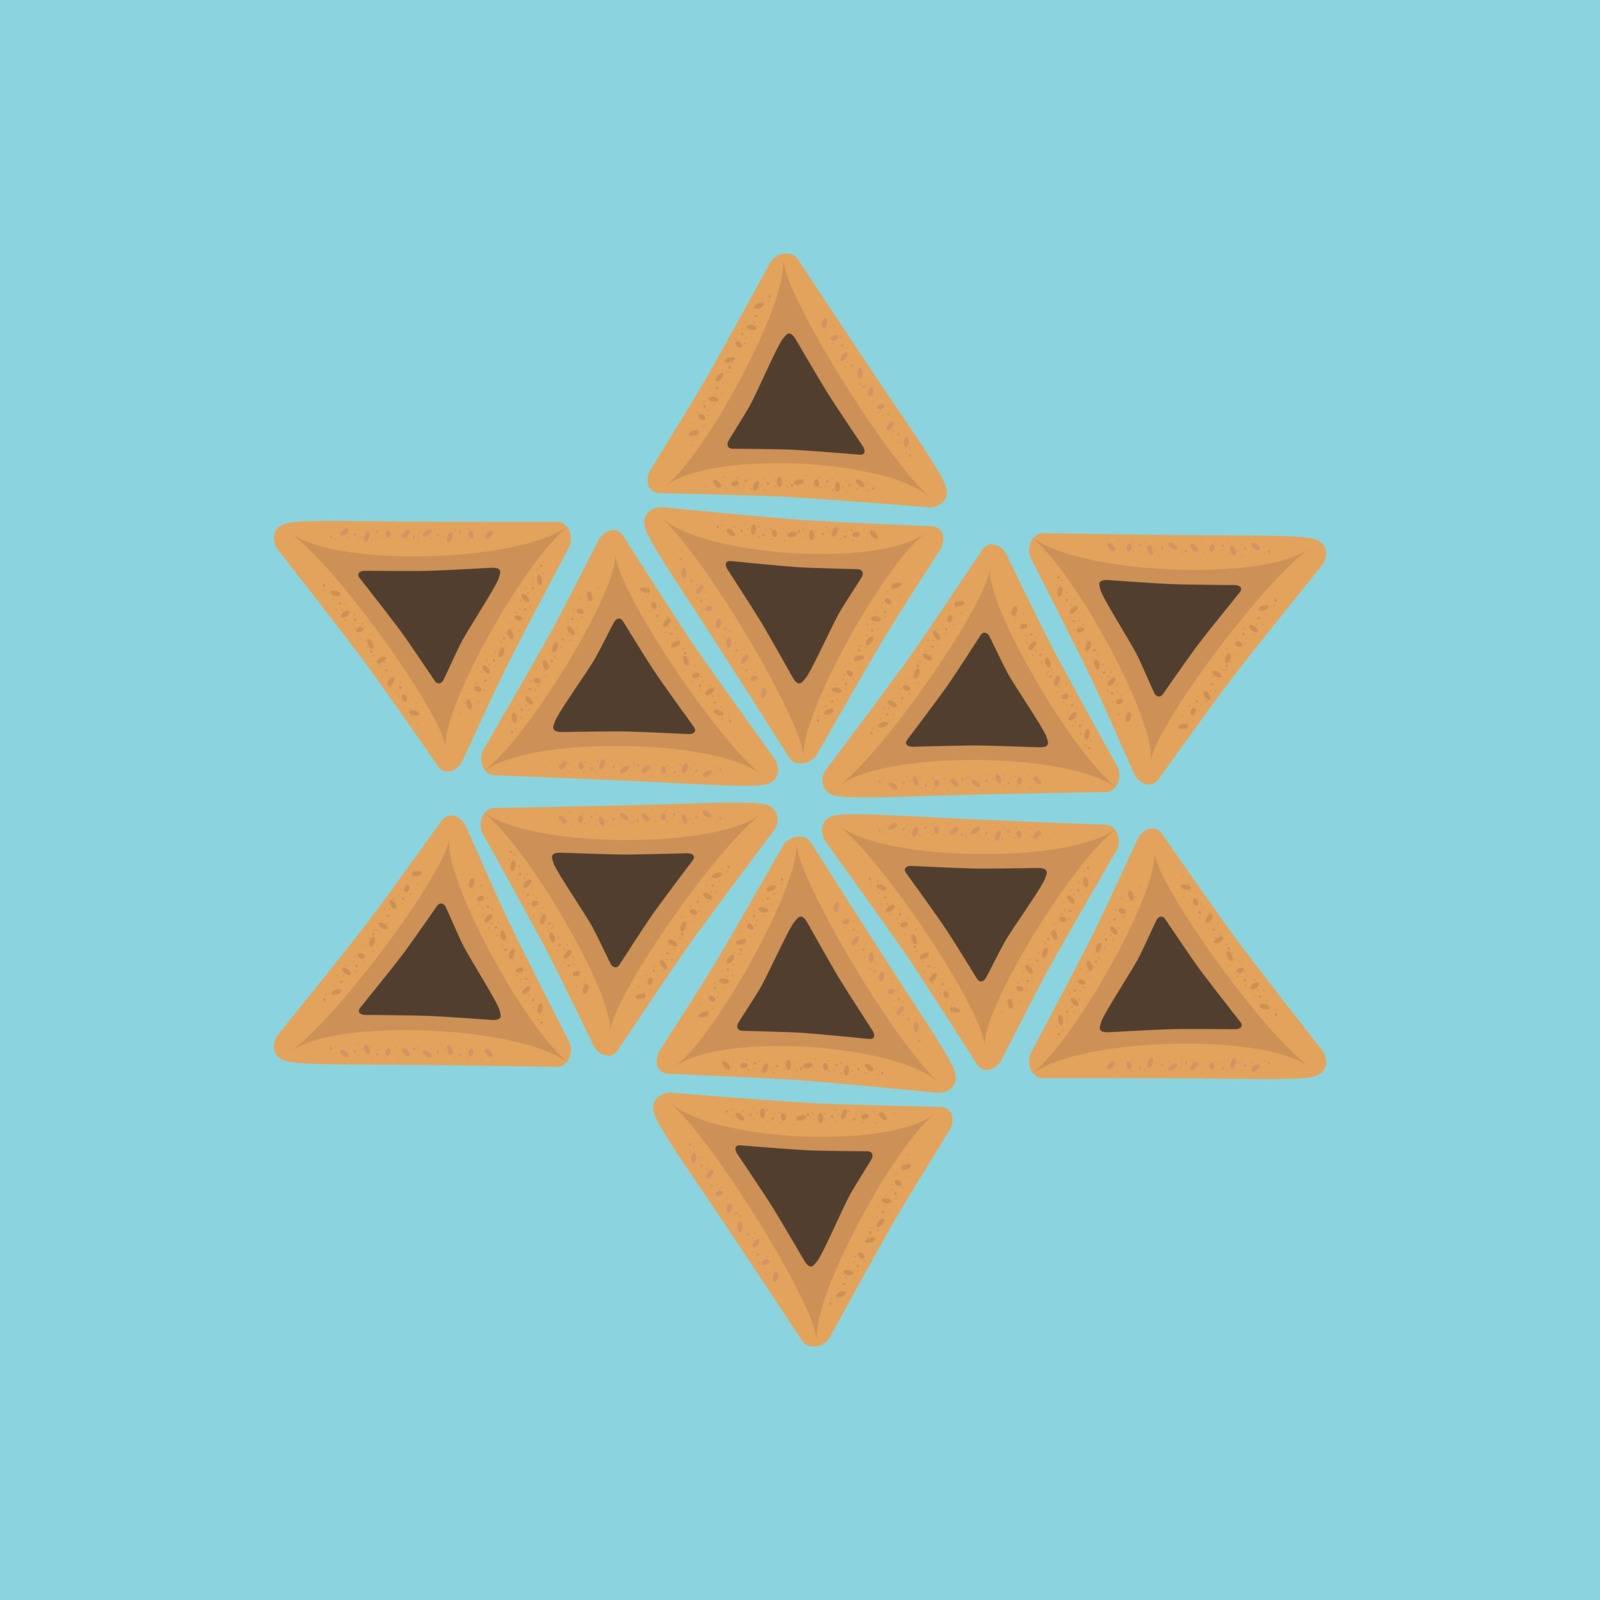 Purim holiday flat design icons of hamantashs in star of david shape with blue background by wavemovies